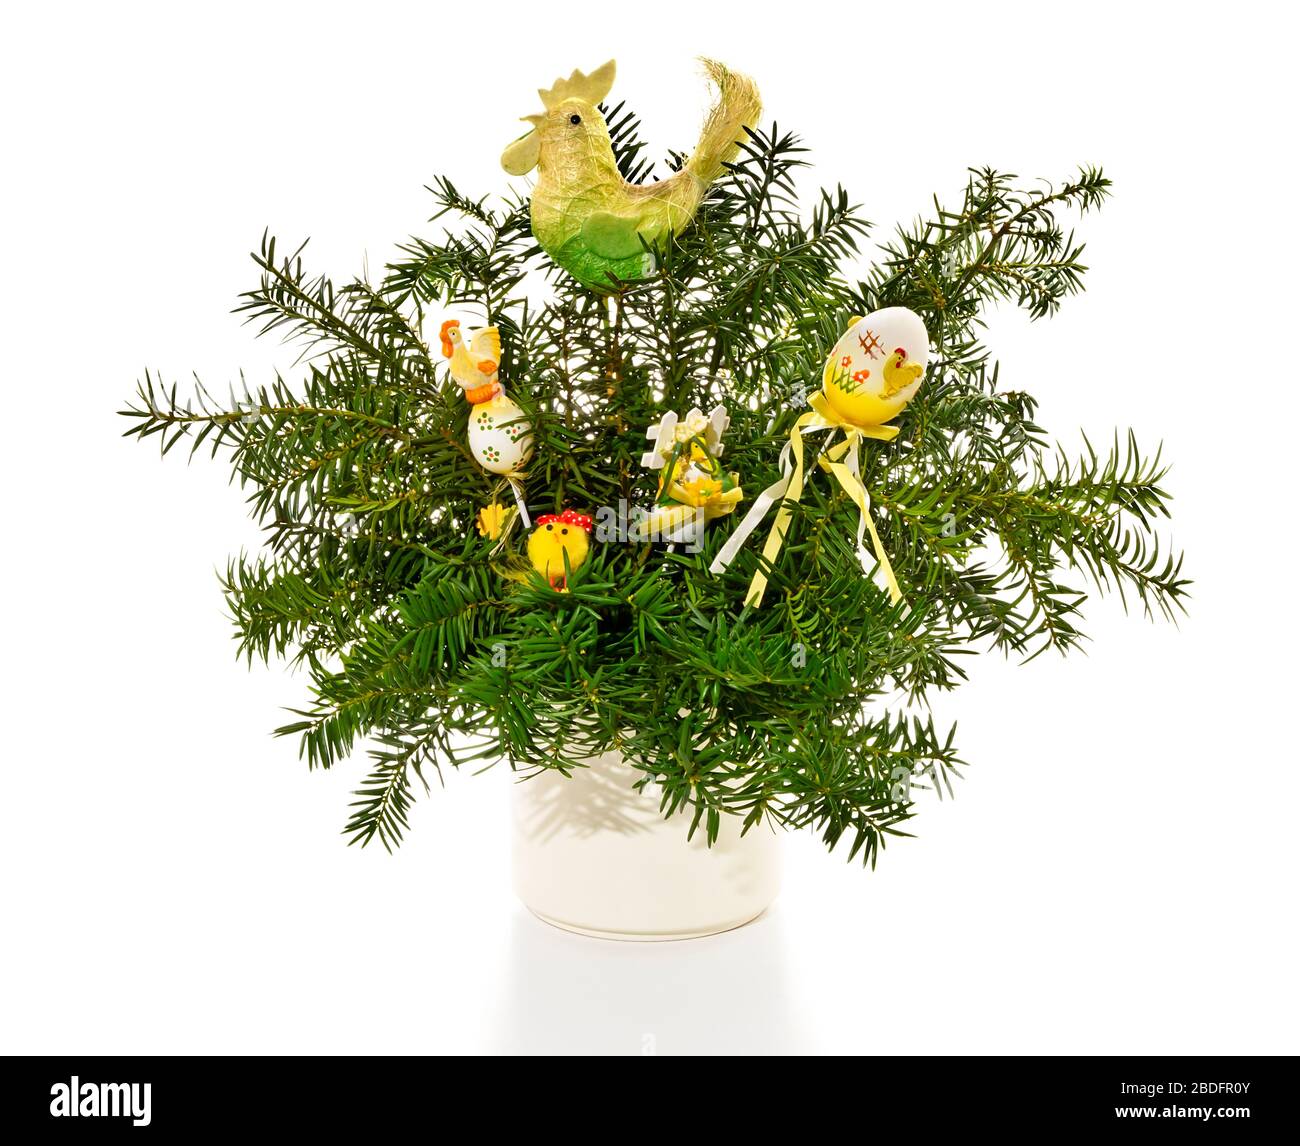 aster decoration with Easter eggs and yew branches Stock Photo